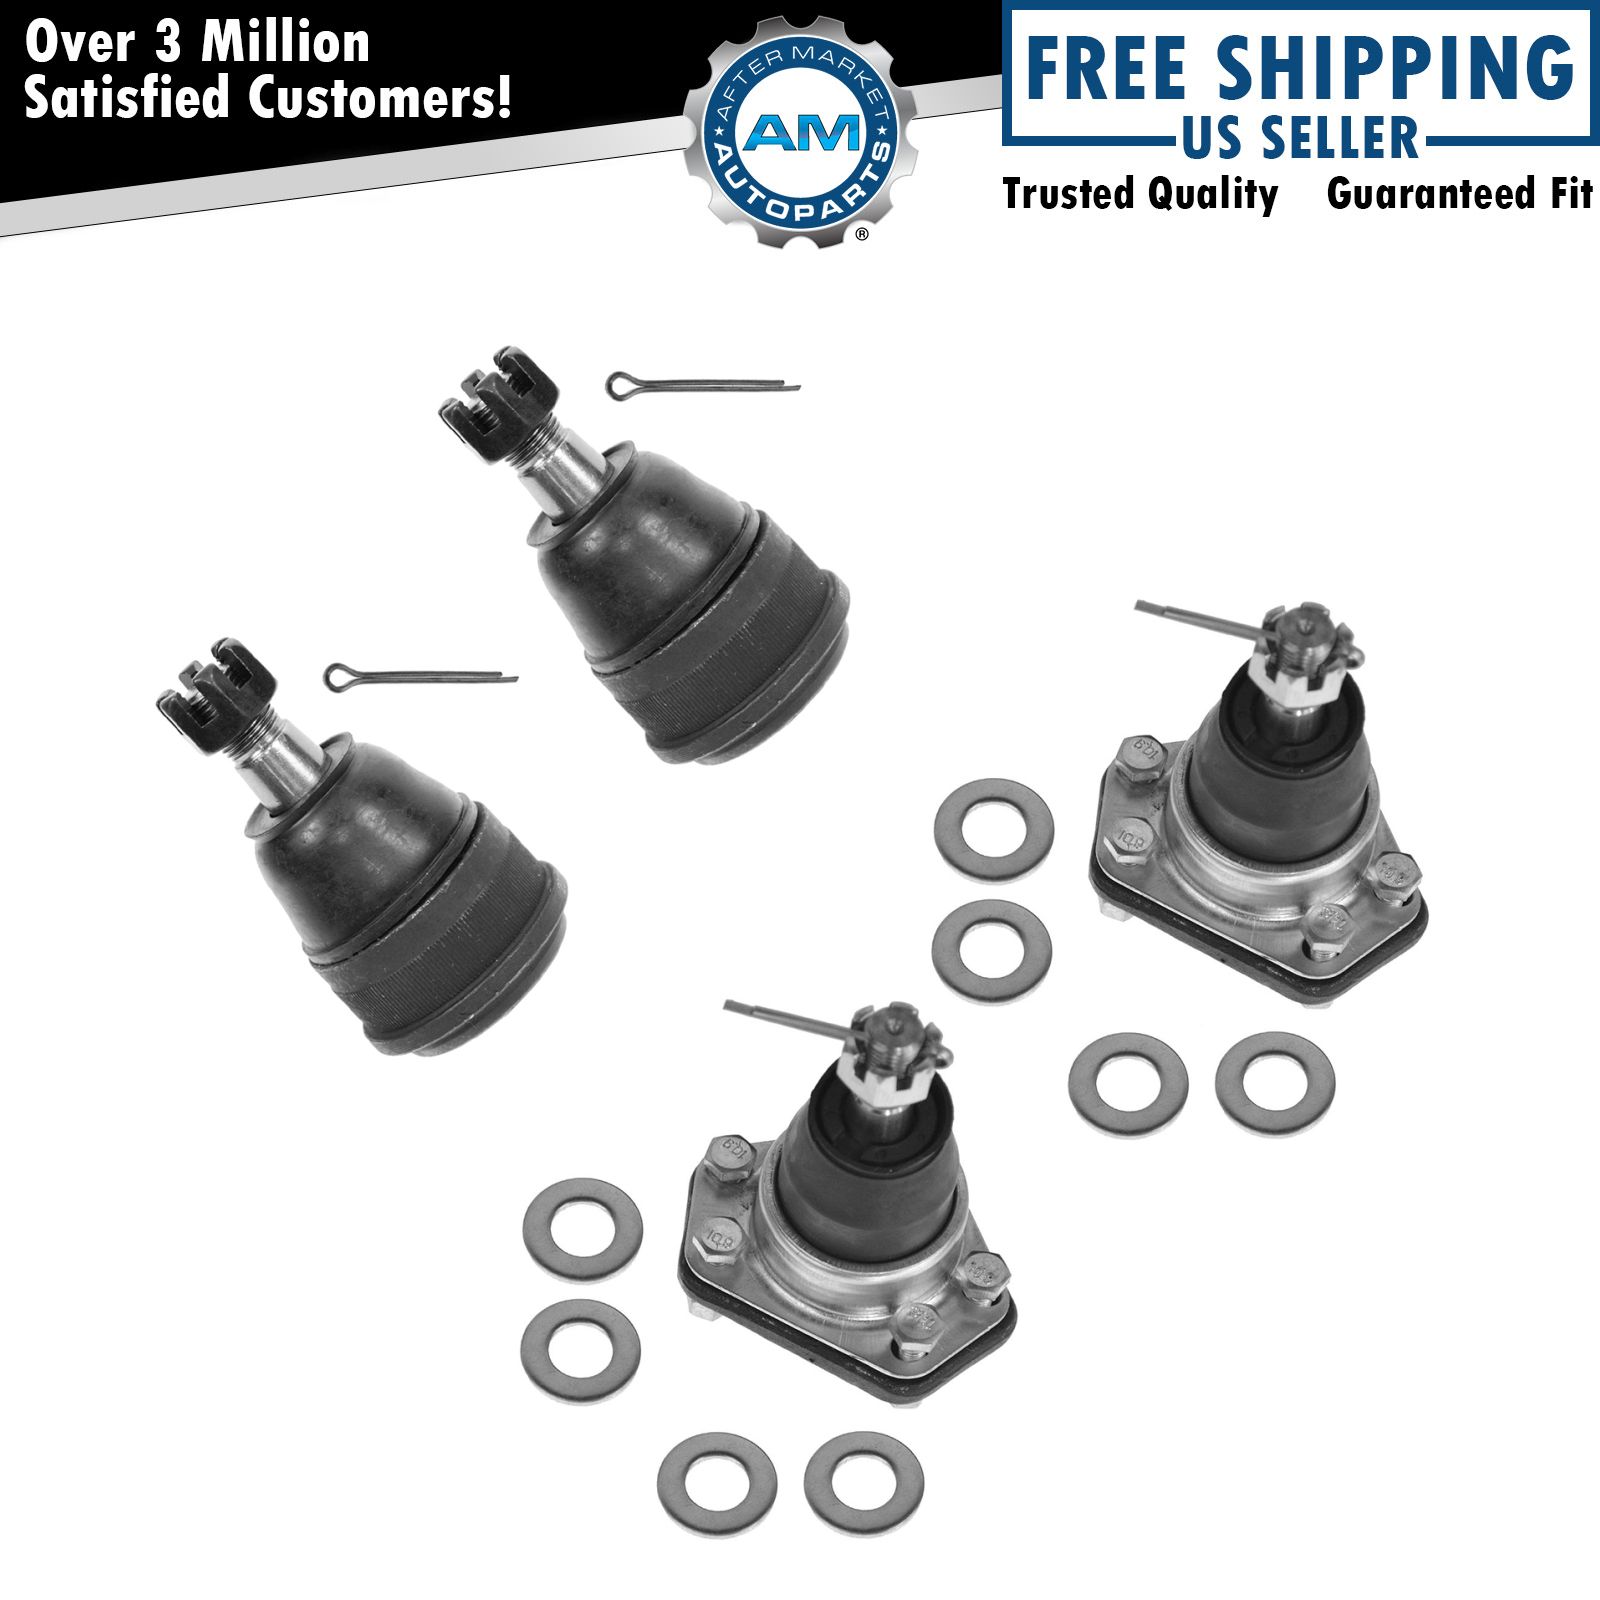 Ball Joint Upper & Lower Kit Set of 4 for Chevy GMC Buick Cadillac Brand New